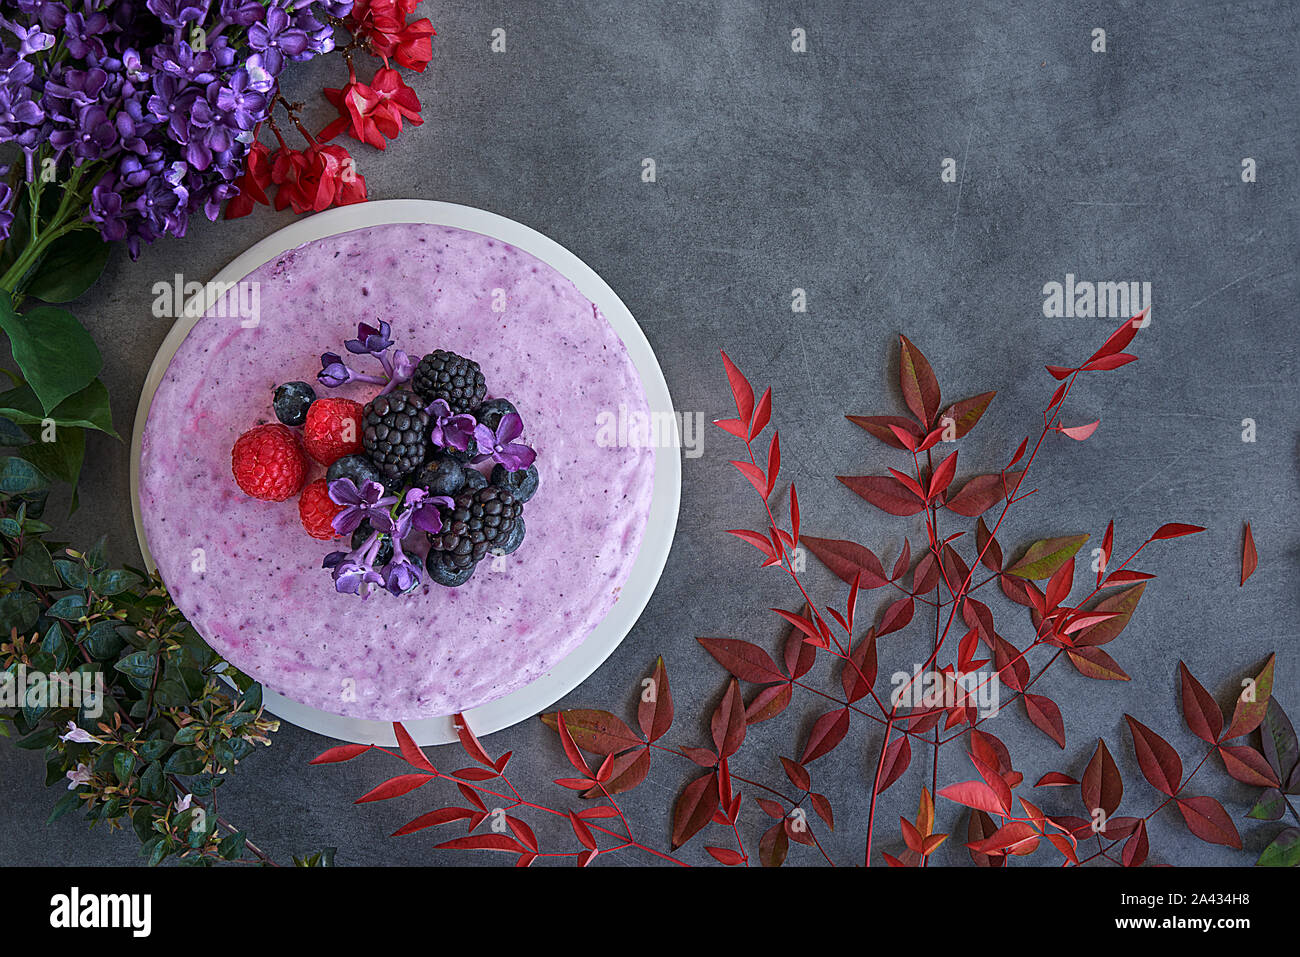 Ice cream cheesecake and berries on a background in green tones. Accompanied with a basket of blueberries, blackberries and raspberries. Stock Photo